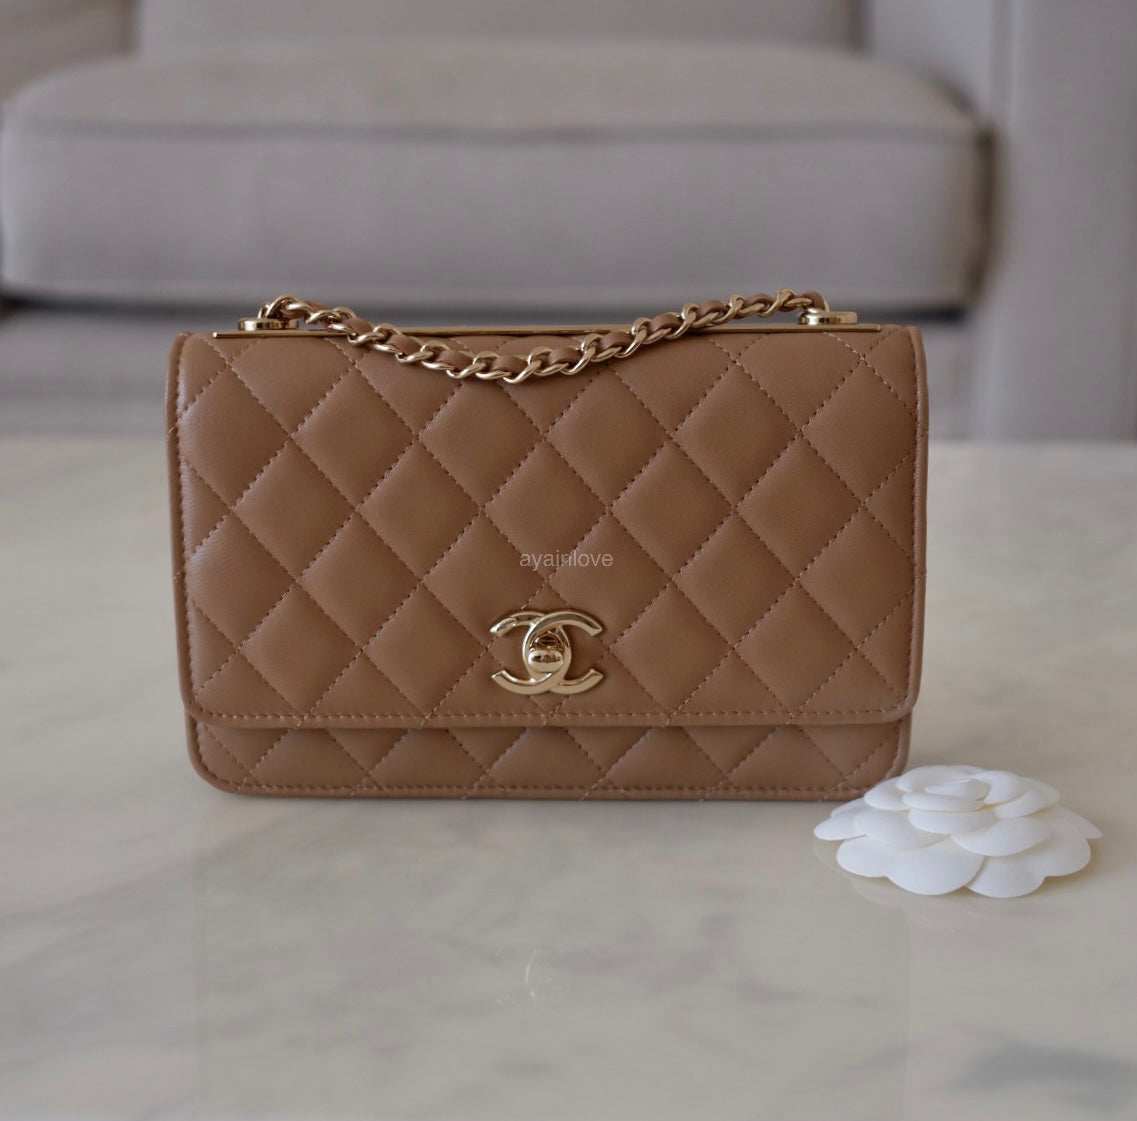 CHANEL Beige Taupe Trendy Microchipped Lamb Skin Wallet on Chain WoC Light Gold Hardware